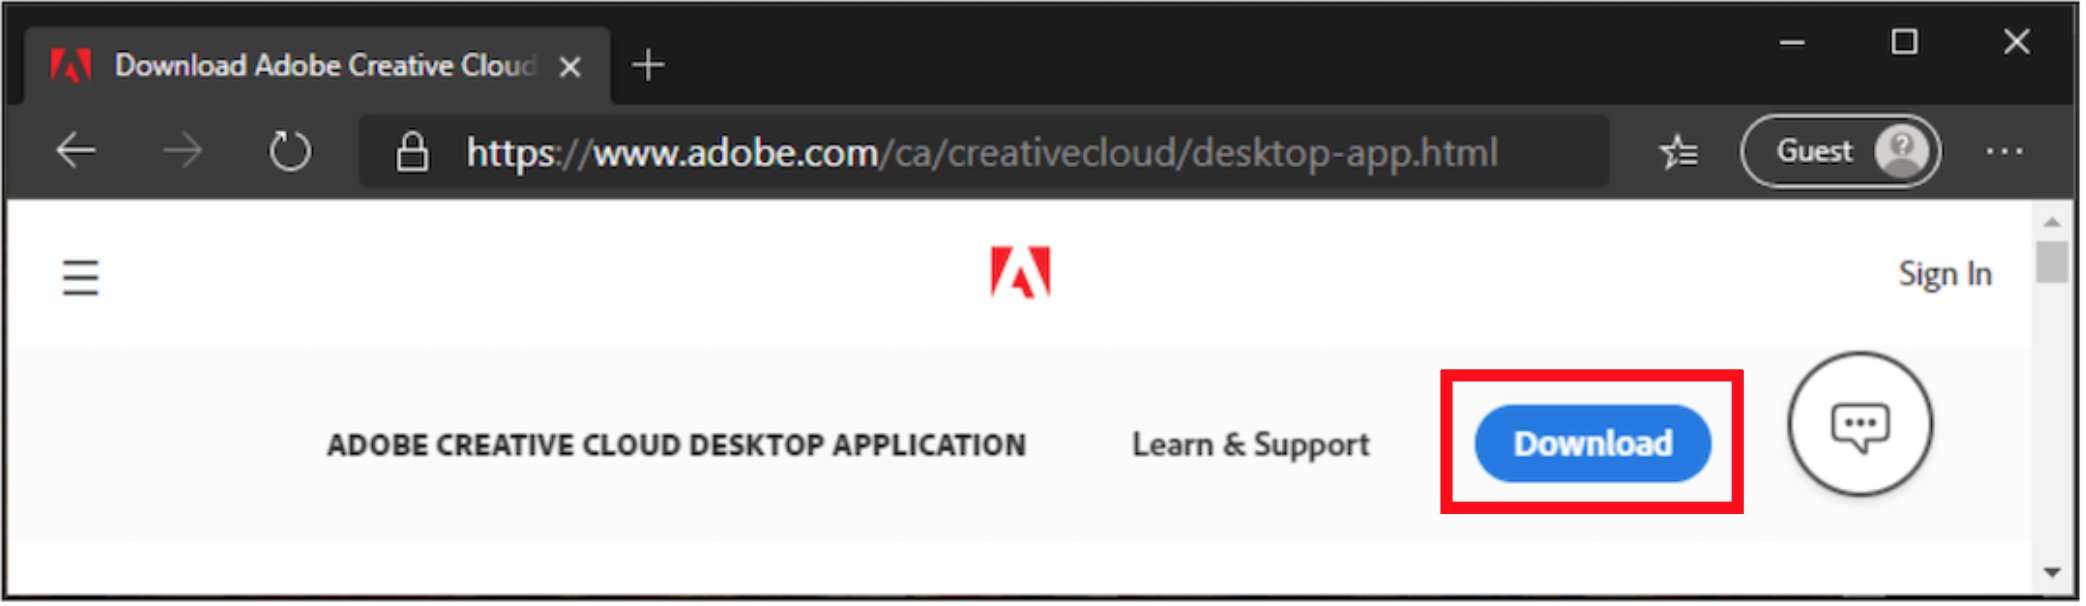 The Adobe screen displays the blue 'download' button on the top right corner to download the Adobe Creative Cloud Desktop App. 